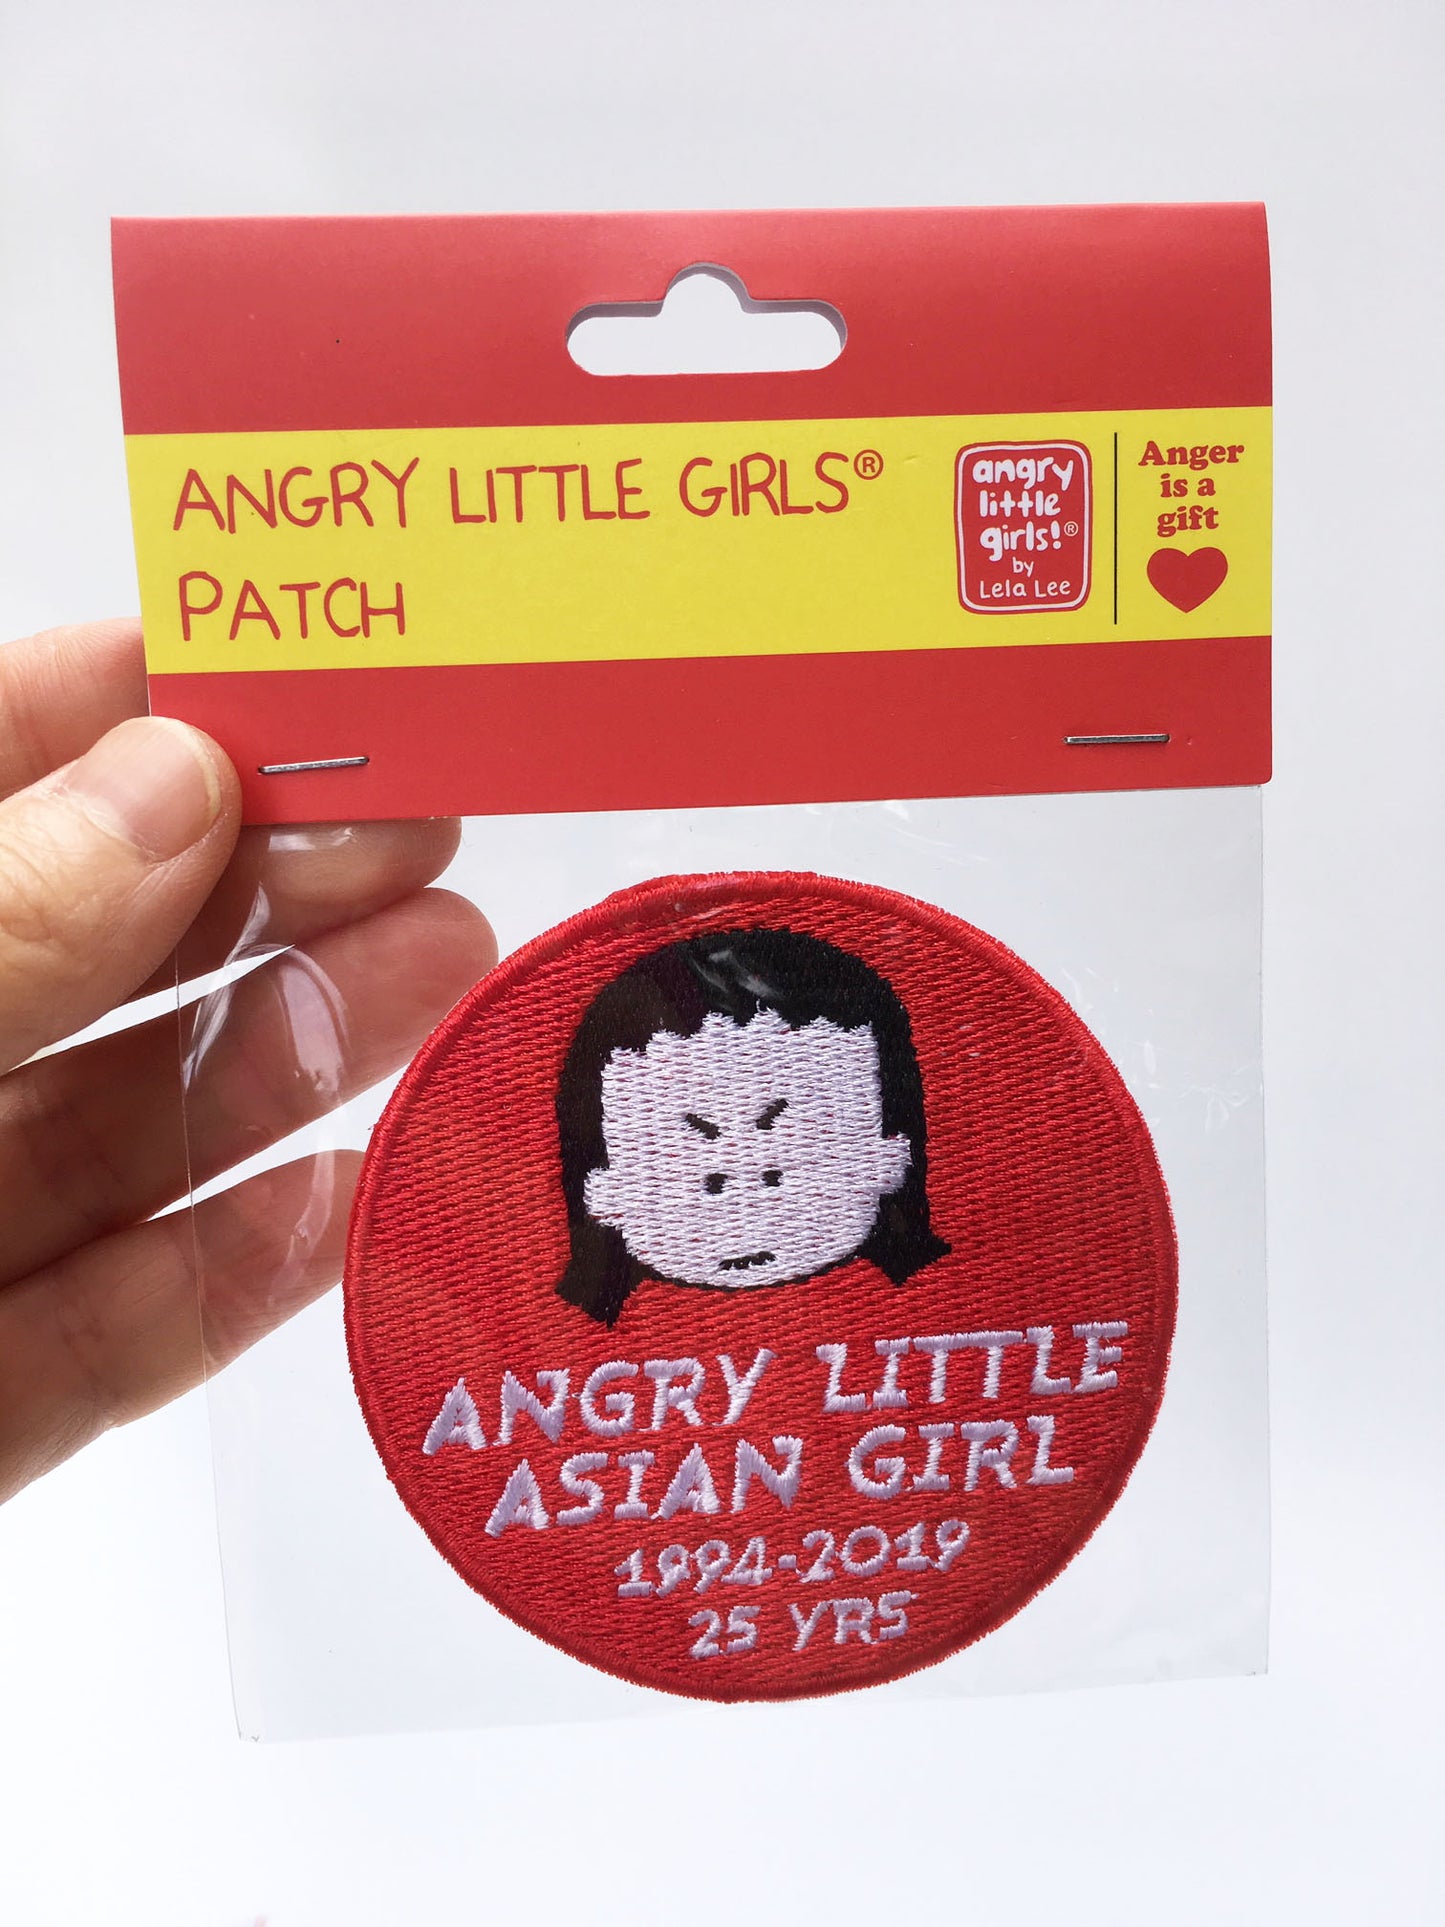 Patch Angry Little Asian Girl 1994-2019 25 YRS